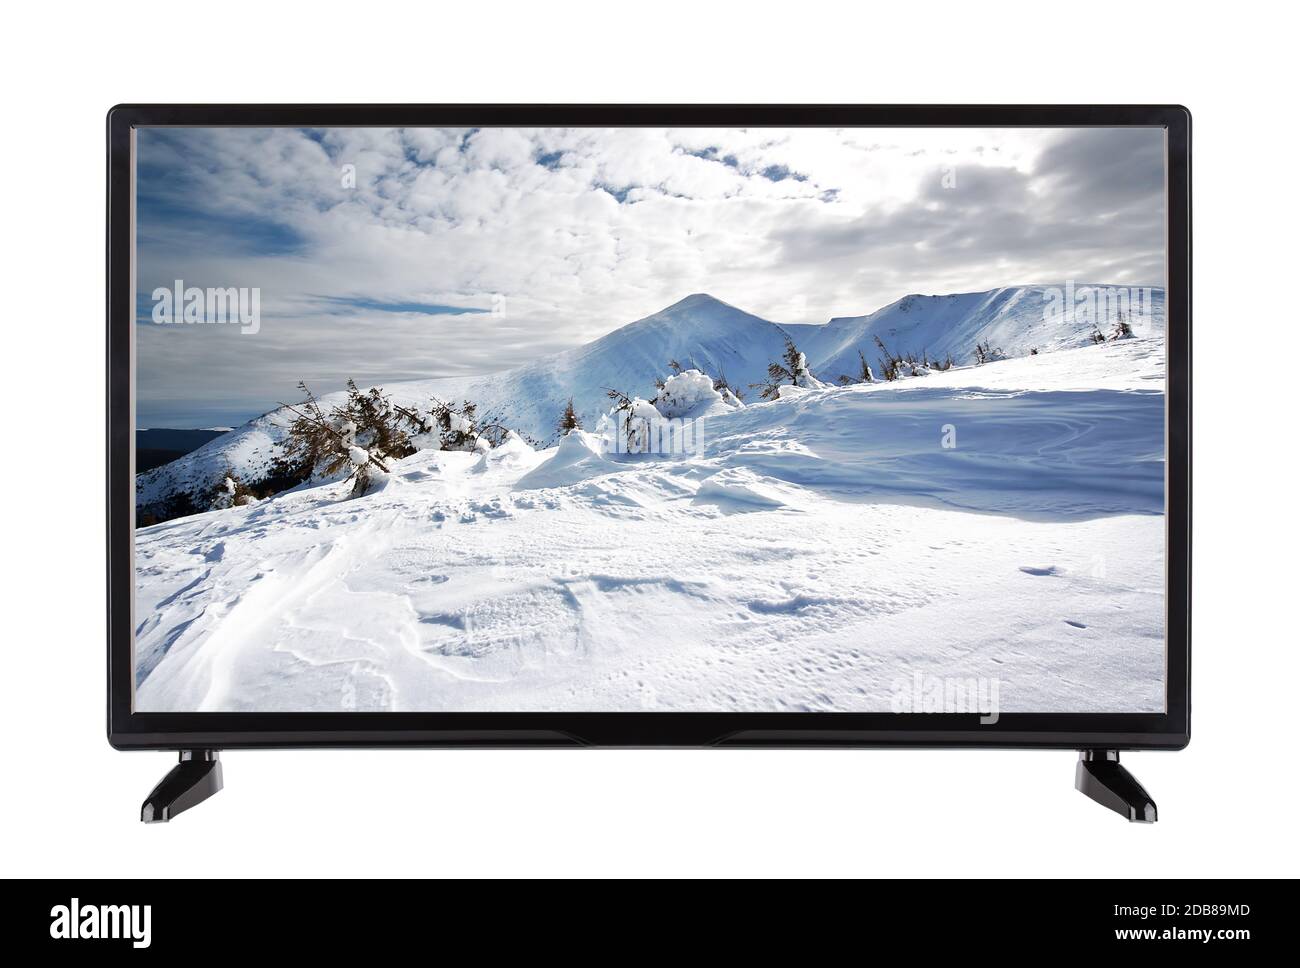 LCD vs. LED: Which TV is Better for a Cold Weather?